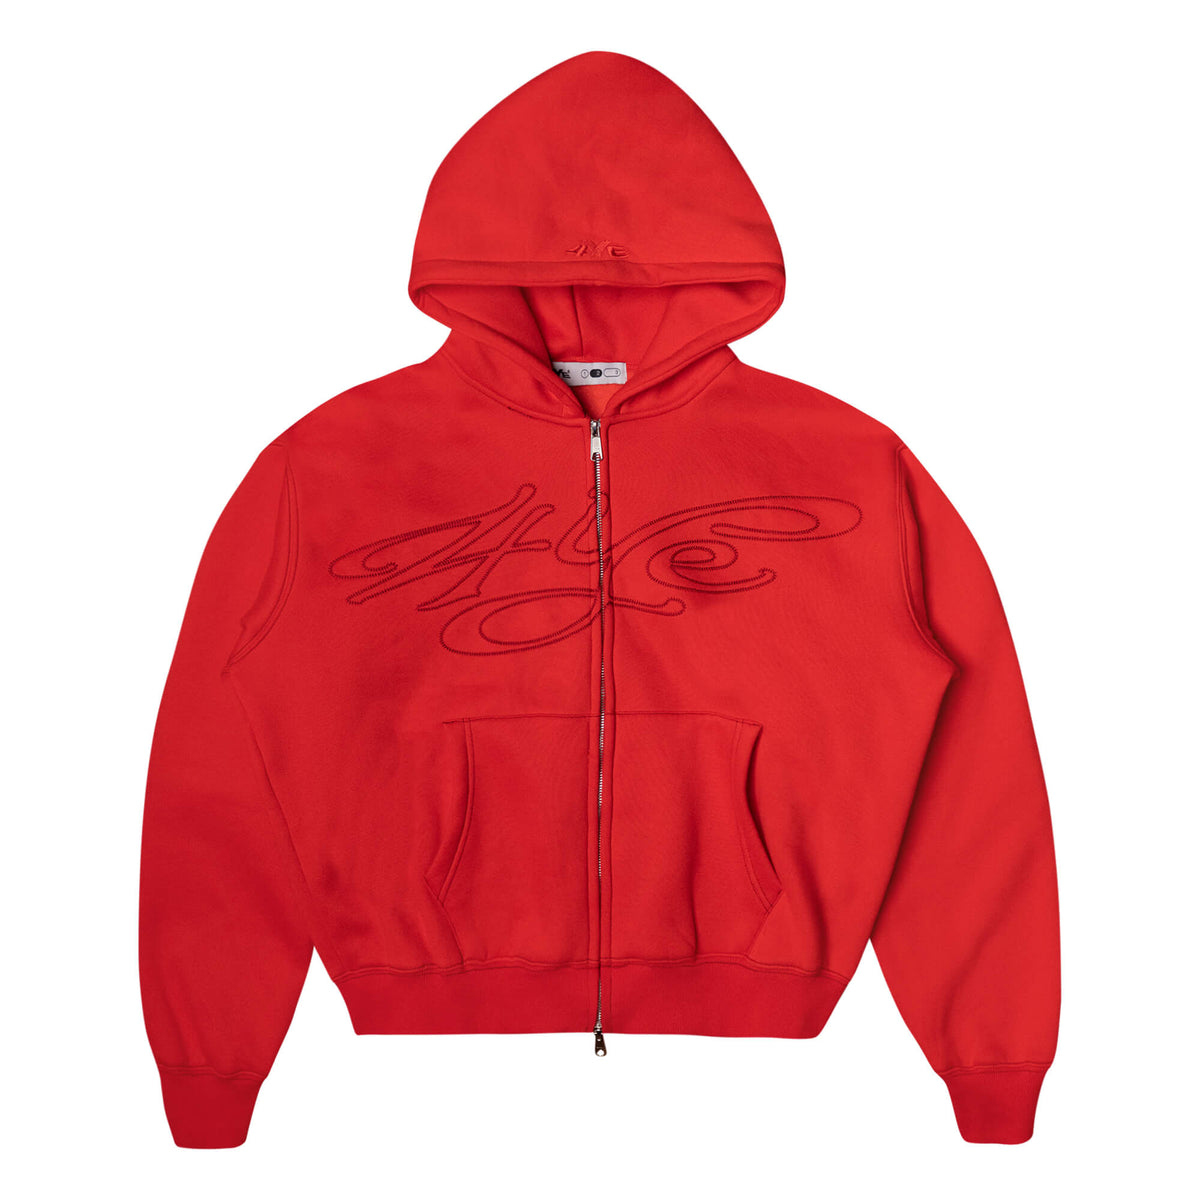 Front view of the 4YE Signature Logo Zip Hoodie in Red. The hoodie features 325 GSM brushed medium weight fleece offering ultimate comfort and warmth, including high-quality chain stitch embroidery and a 2-way YKK zipper, showcasing a trendy cropped and boxy fit.